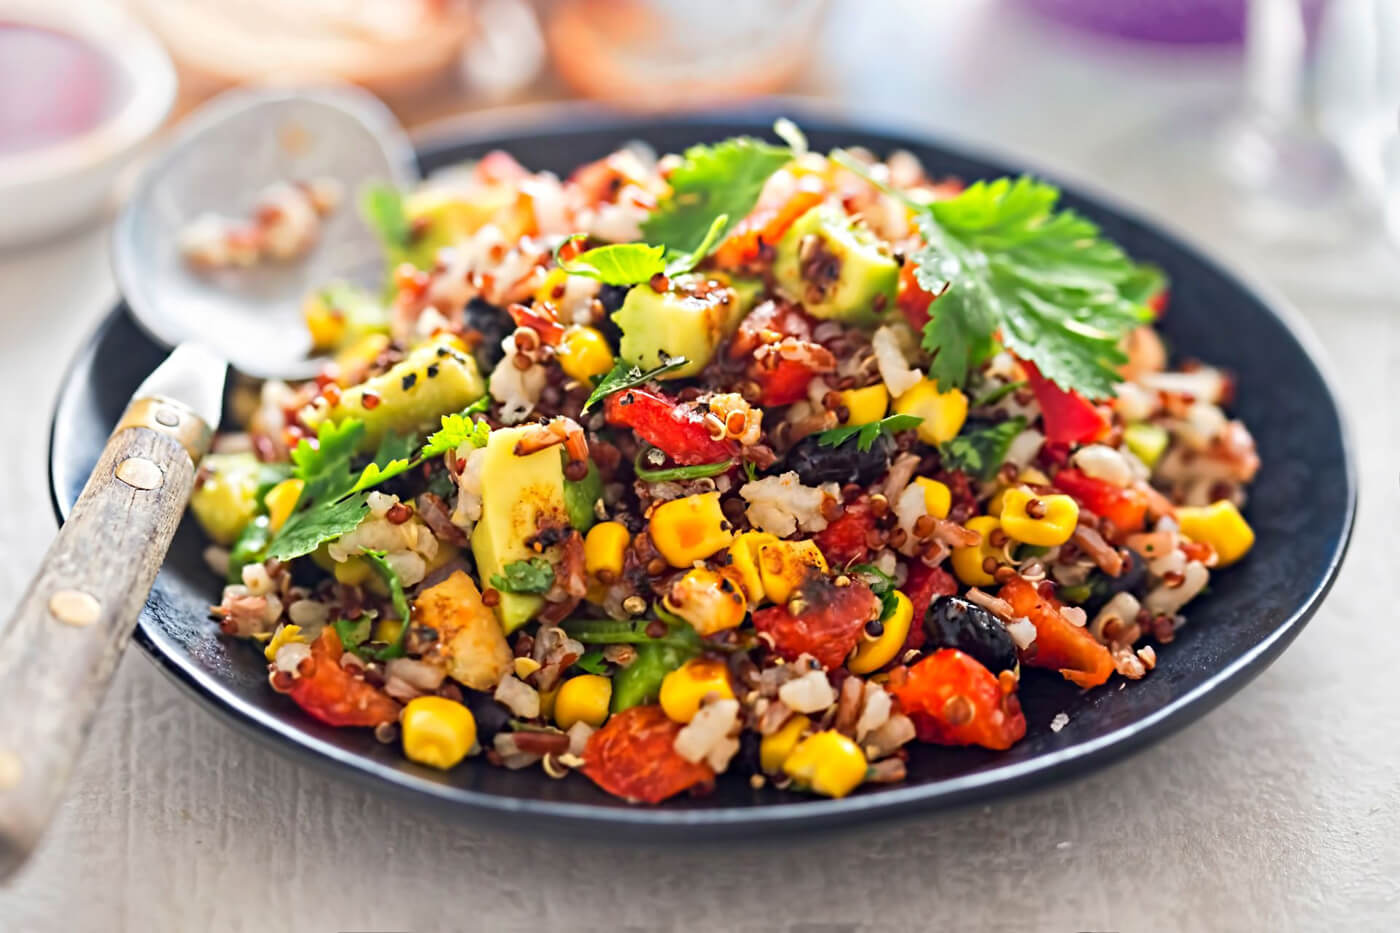 Rice and Beans plant-based meals